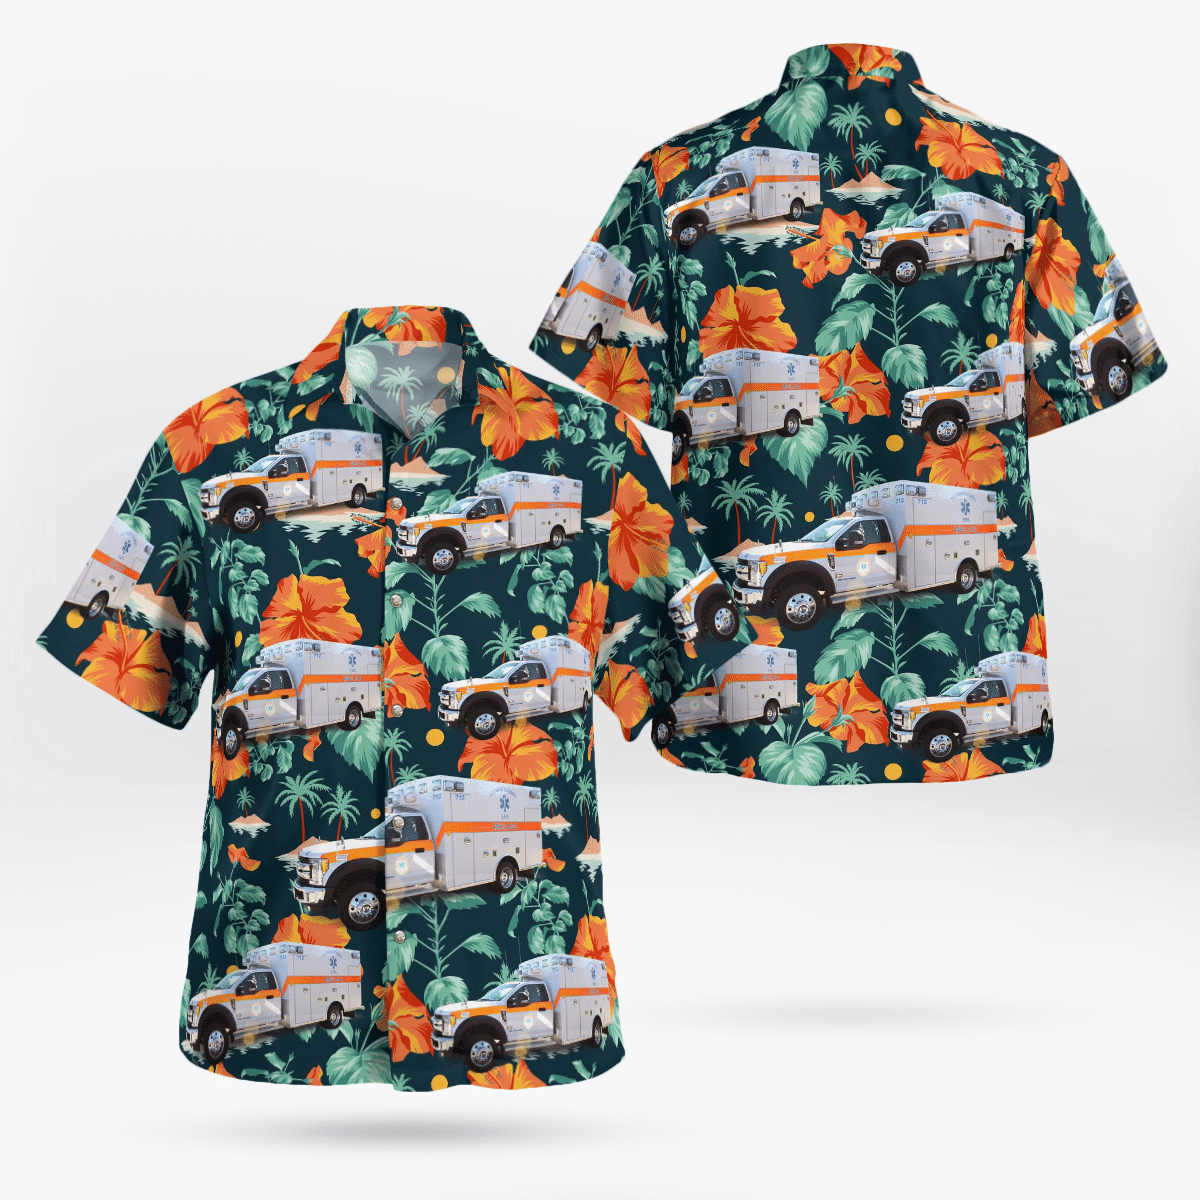 If you are in need of a new summertime look, pick up this Hawaiian shirt 6